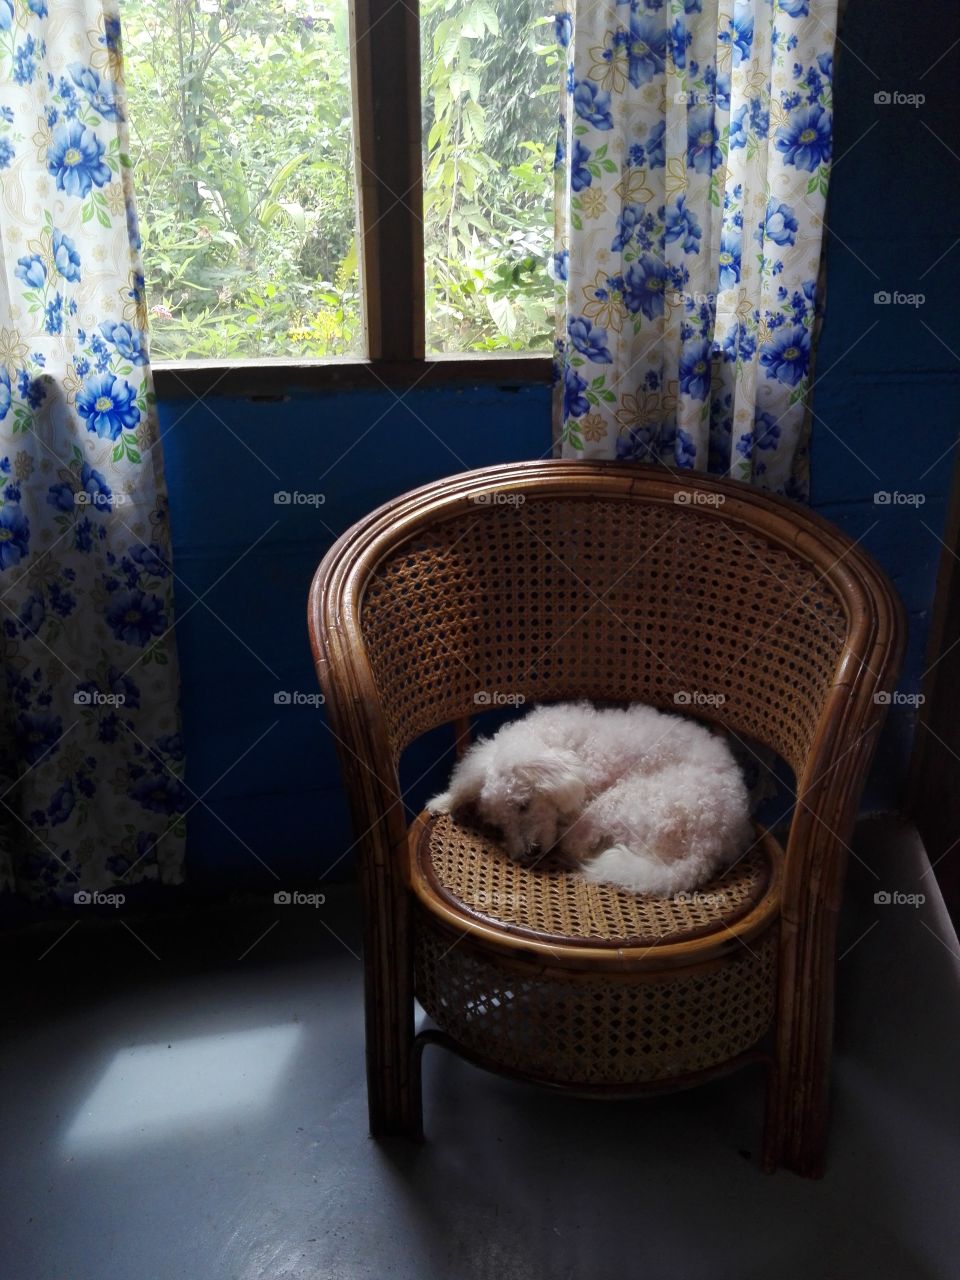 Our family pet sleeping on it's favorite spot in our living room, the rattan chair on the corner.